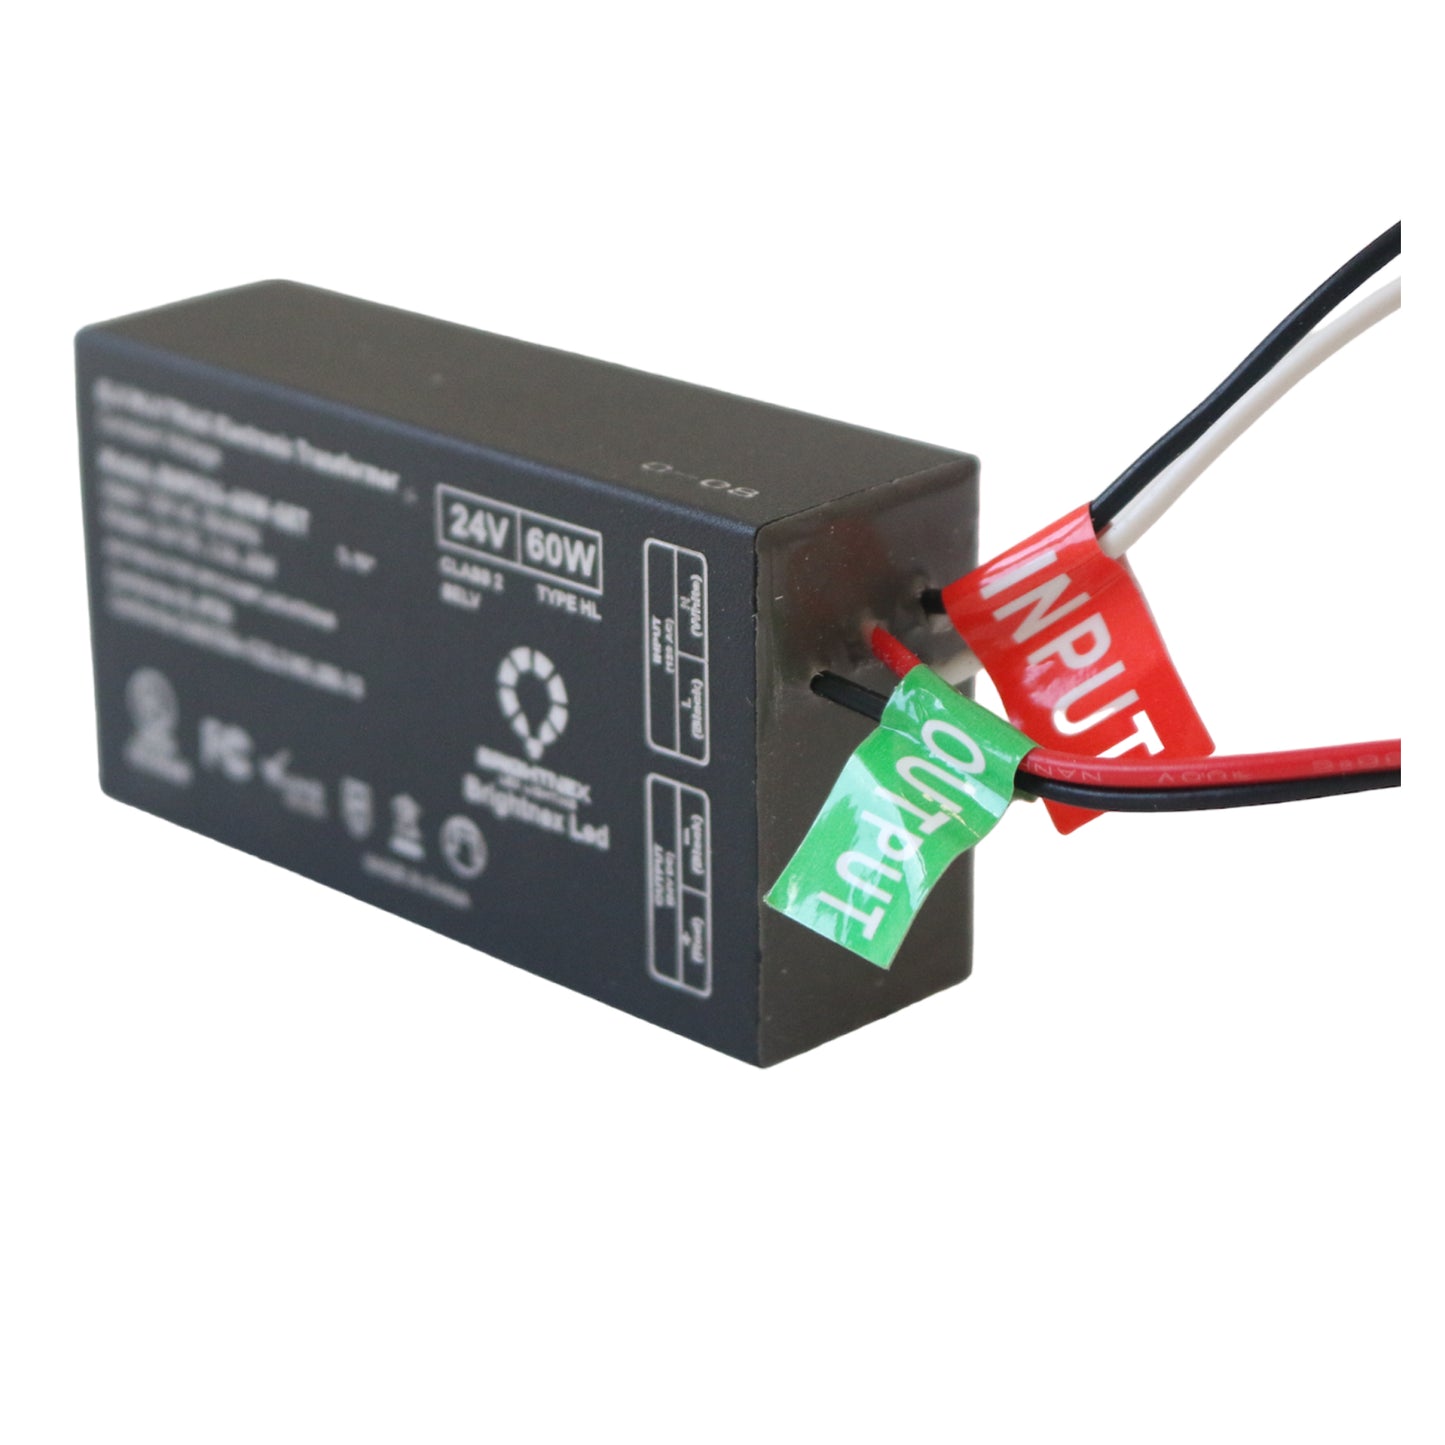 Smallest Dimmable LED Driver (Dimmable LED Transformer), 24V, 60W